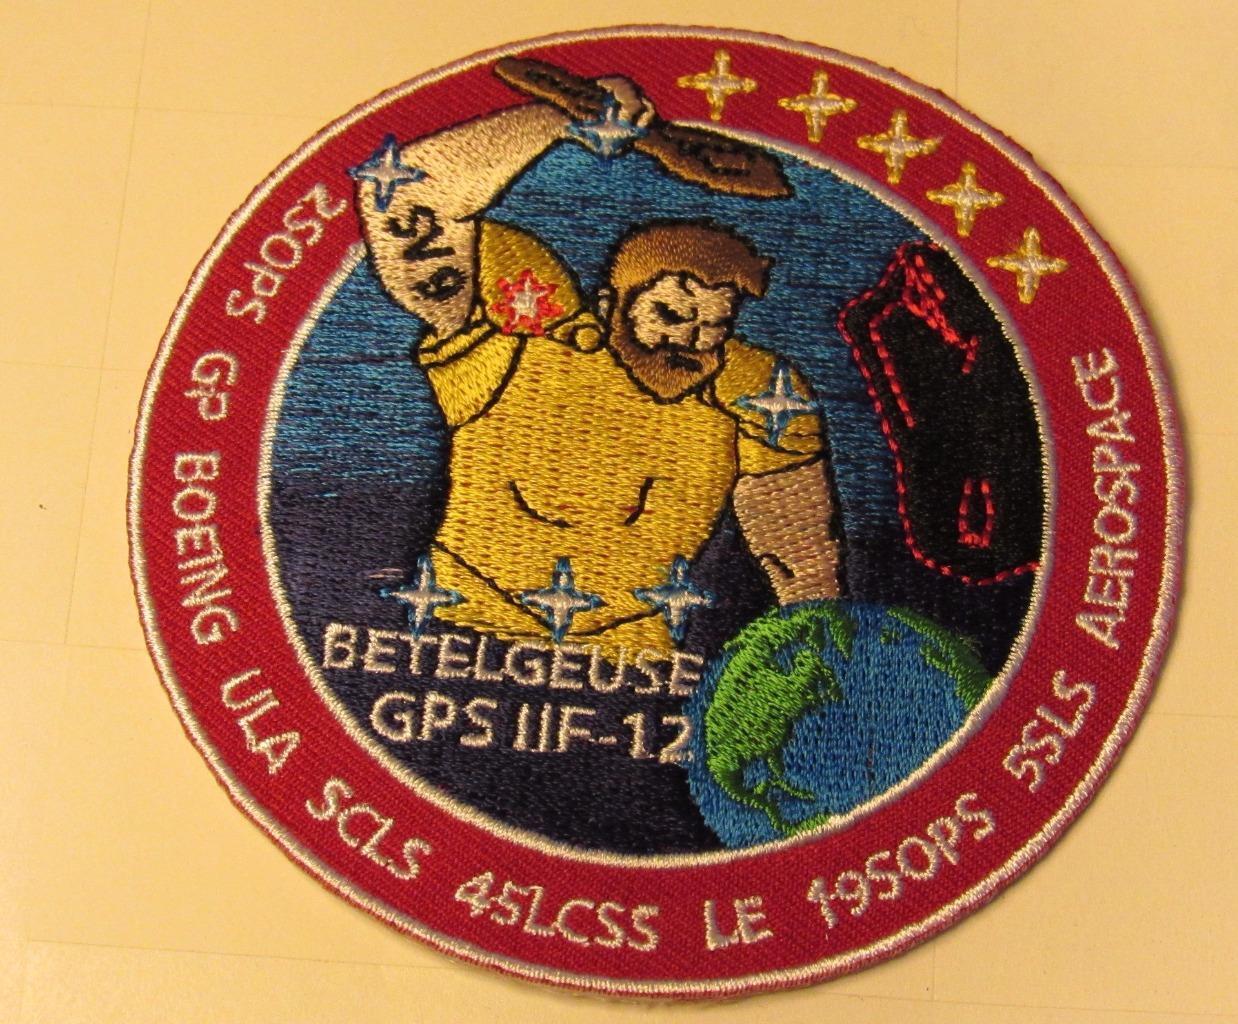 GPS IIF-12 LCSS BETELGEUSE USAF GLOBAL POSITIONING SATELLITE VEHICLE PATCH SPACE